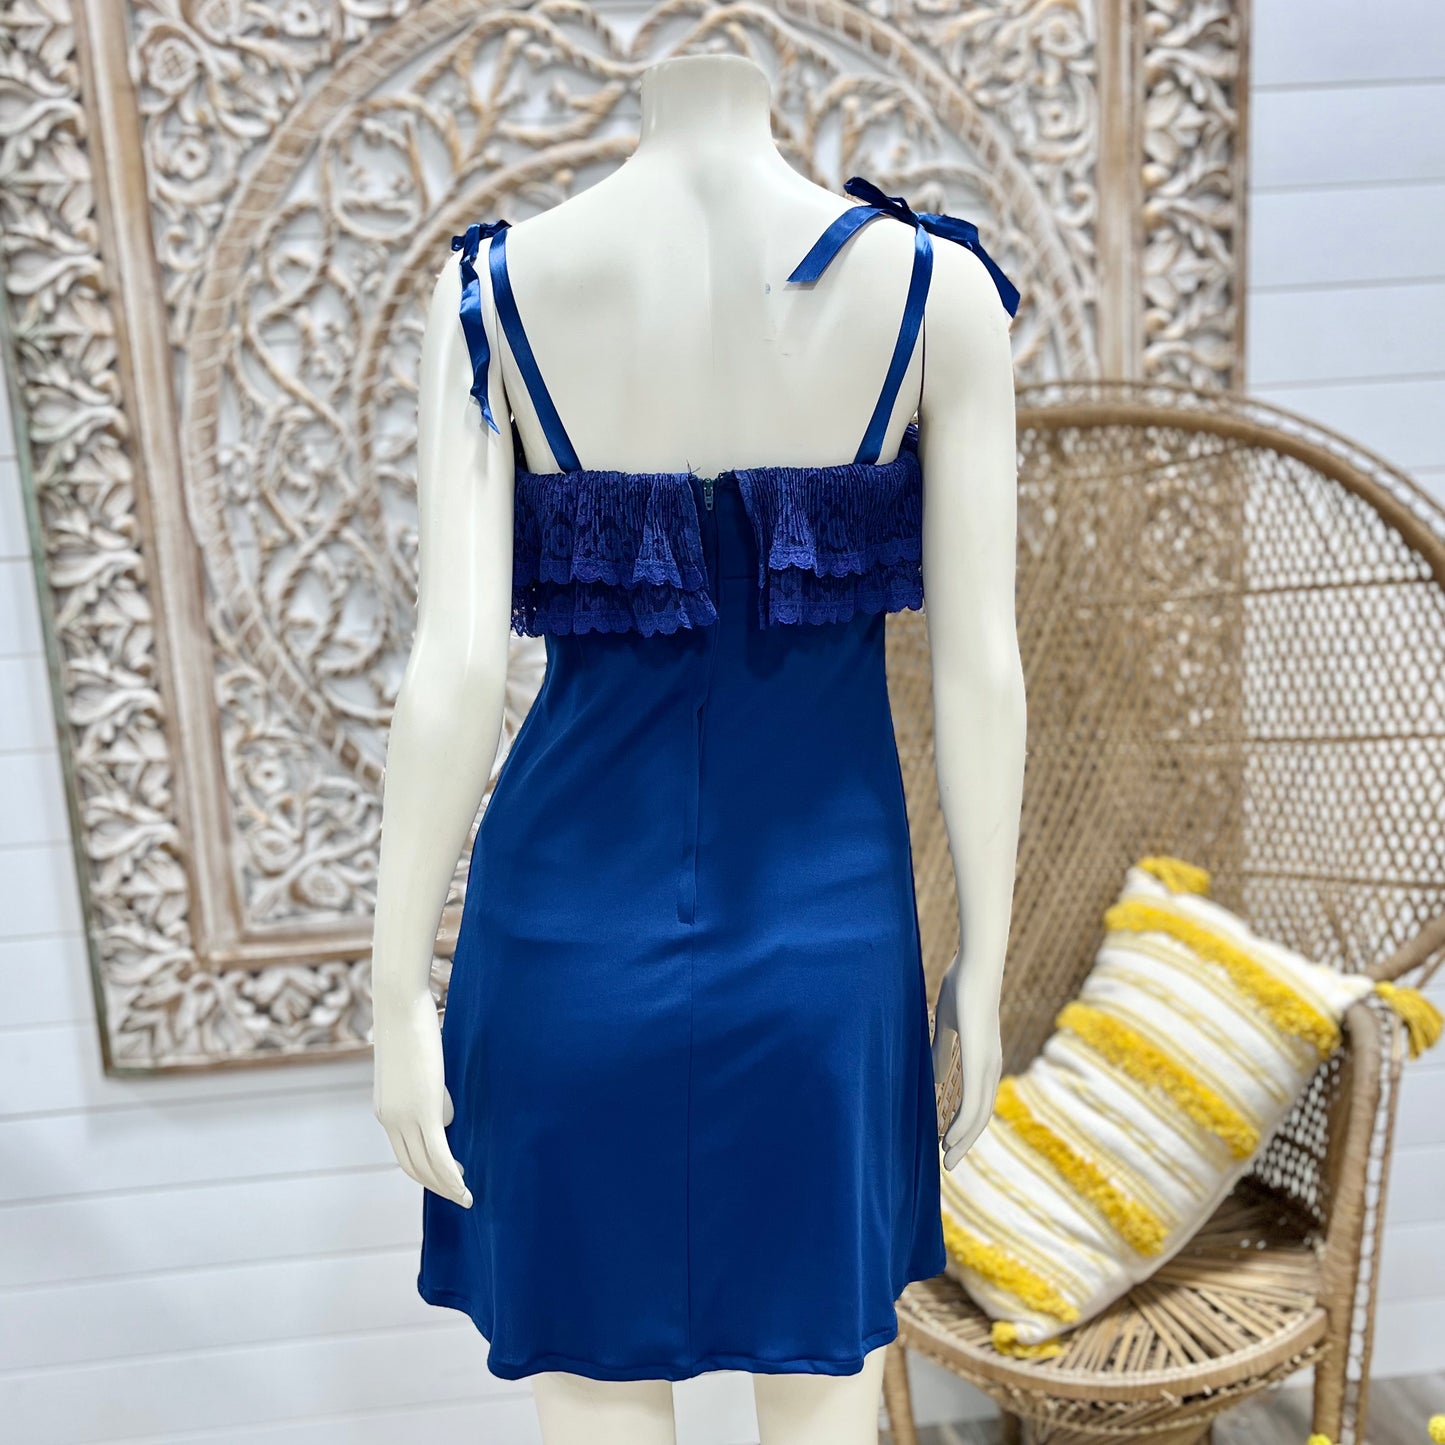 70s Pleated Lace Sexy Blue Empire Mini Vintage Dress XS/S